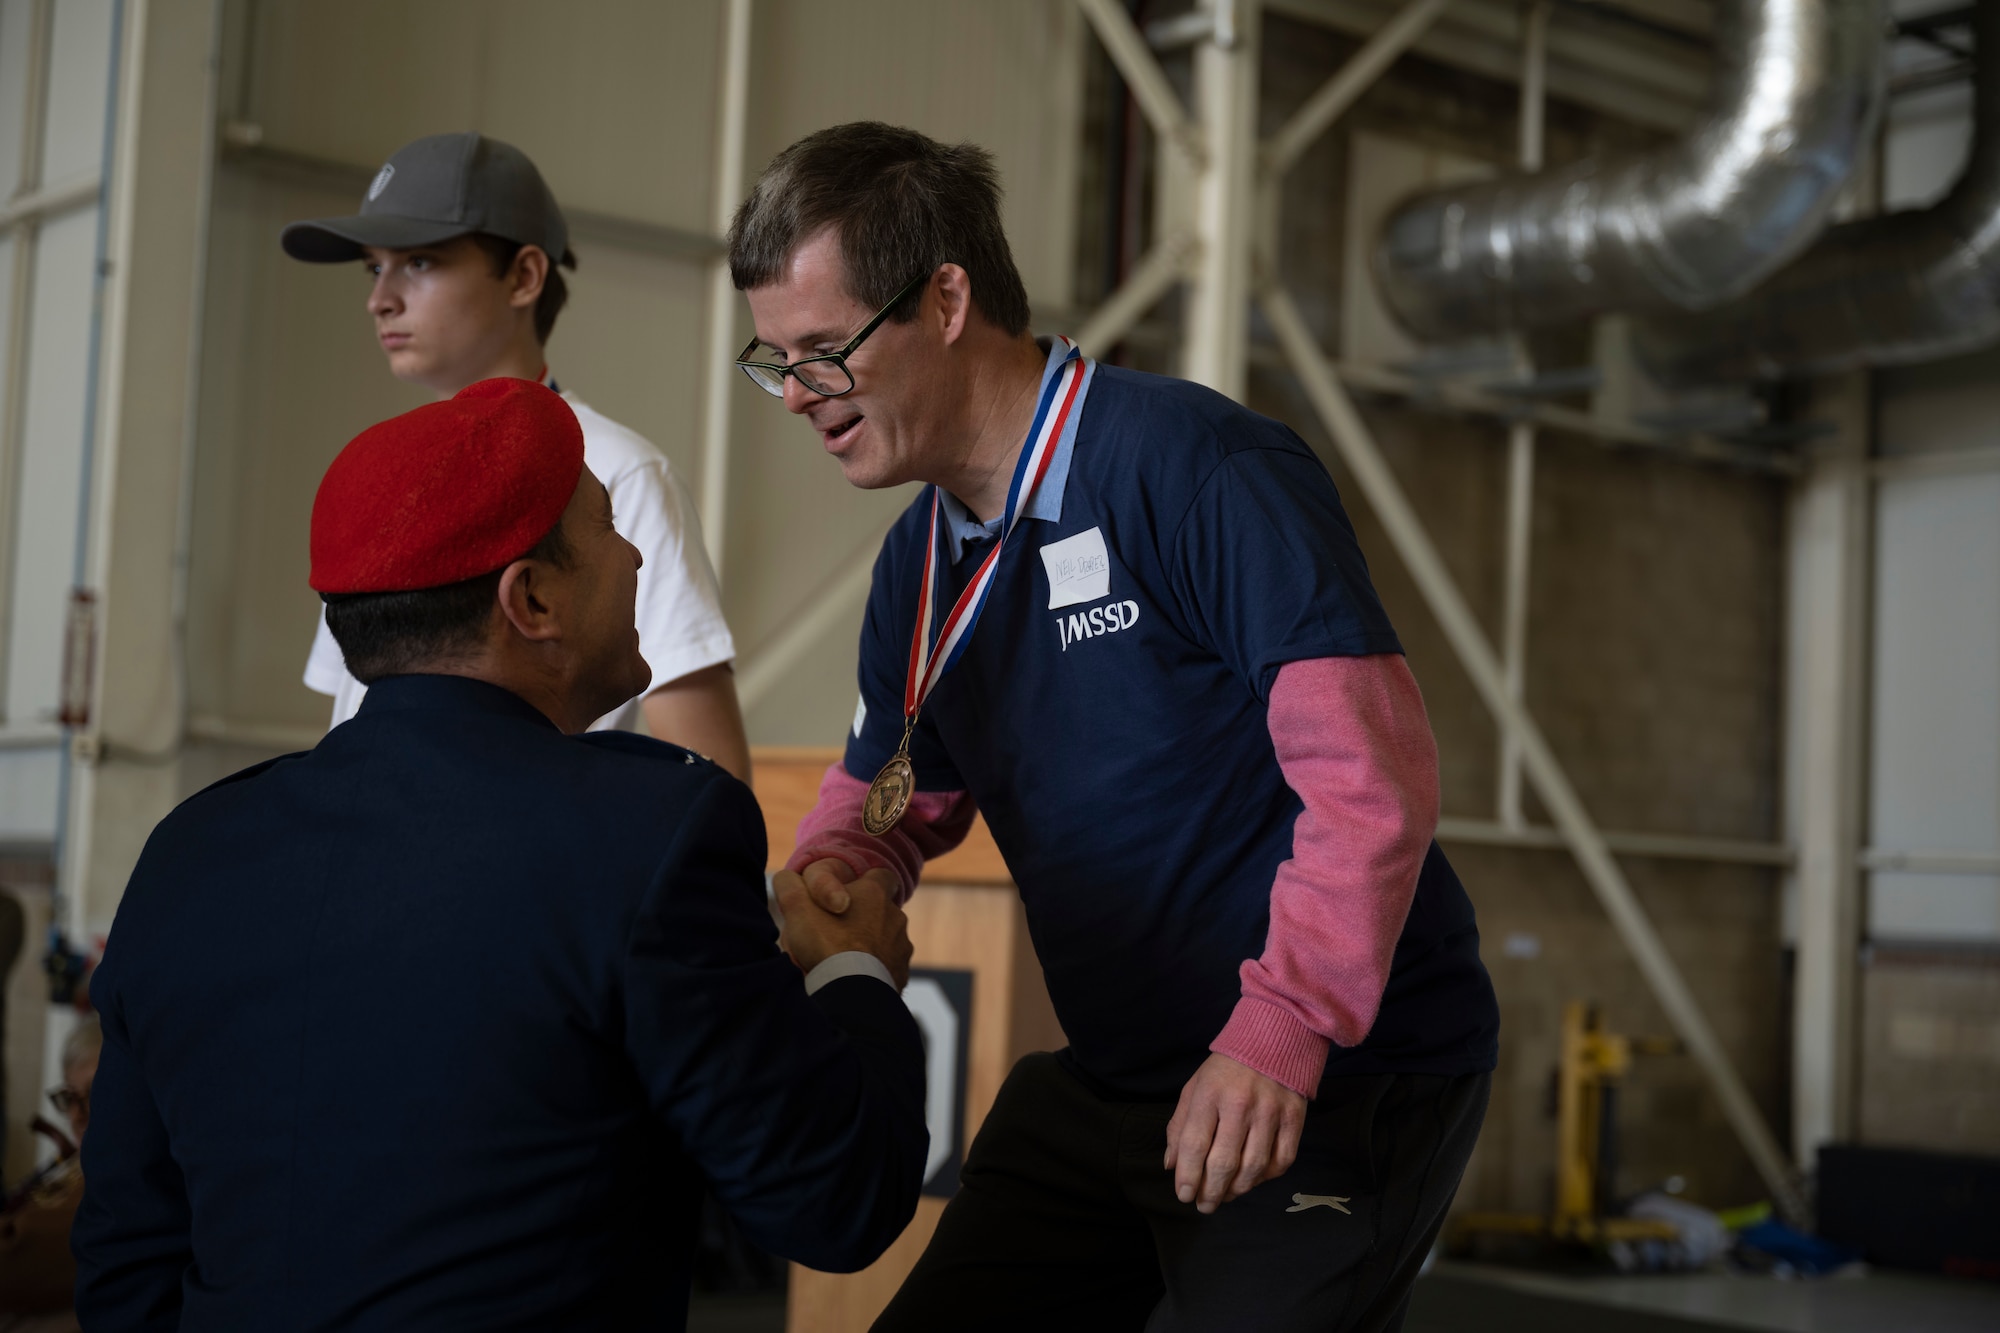 Team Mildenhall hosted the 39th annual JMSSD athletic event to provide an opportunity for athletes from across the Midlands to experience the rewards of friendly competition.